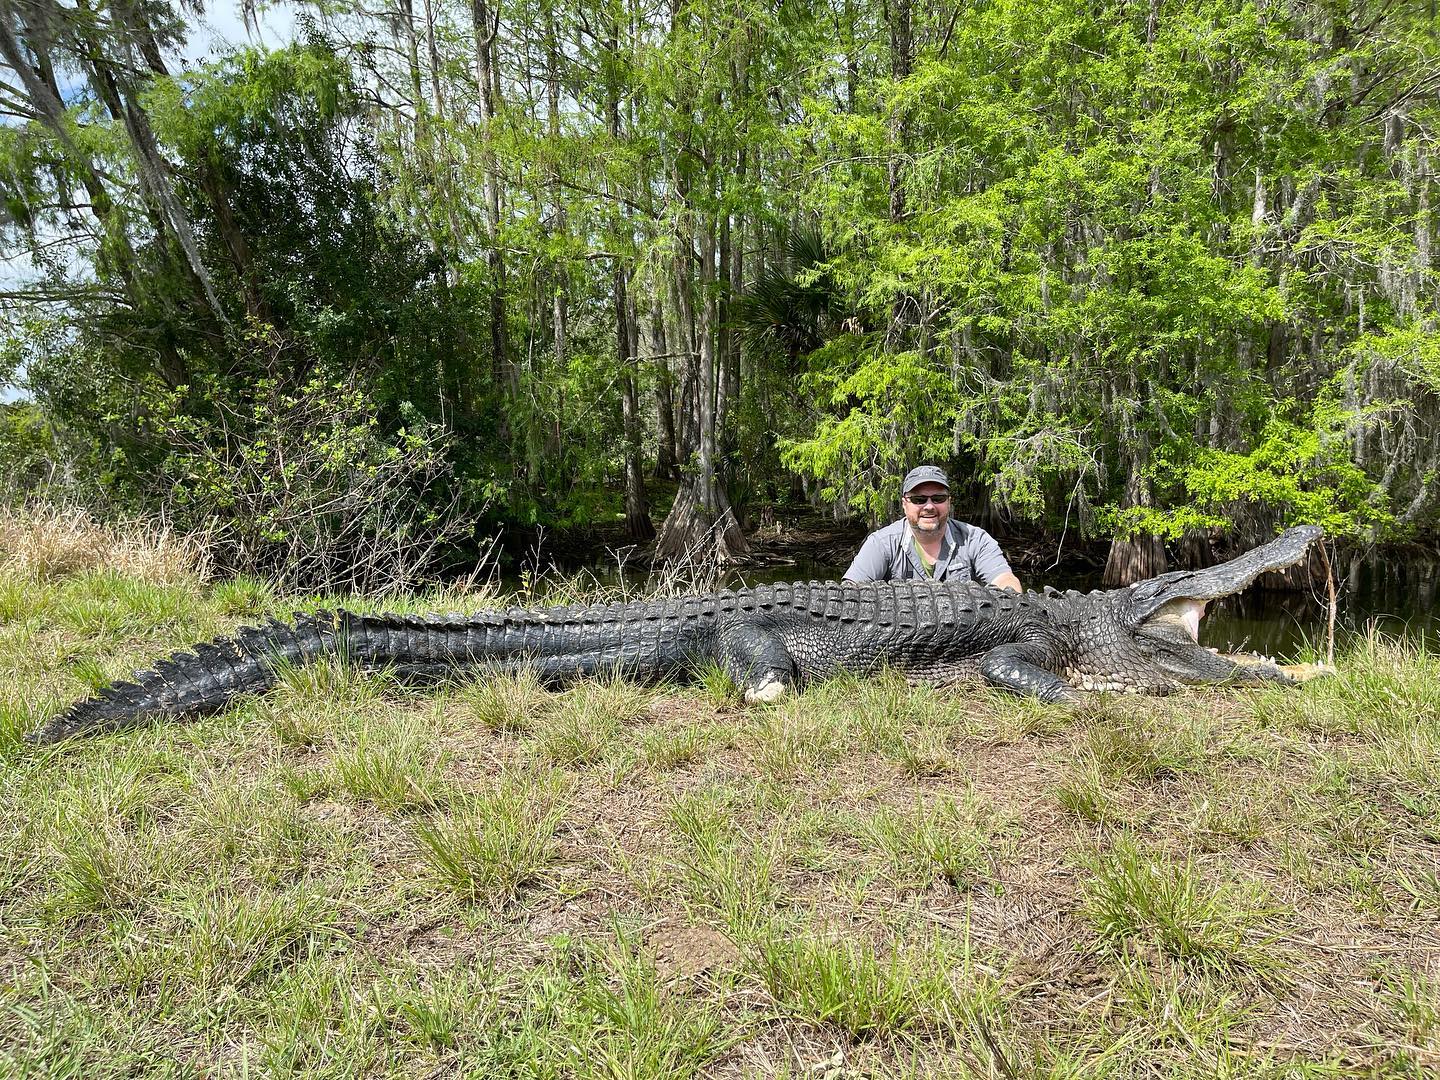 Mike Smith with his 12-foot Florida gator. 